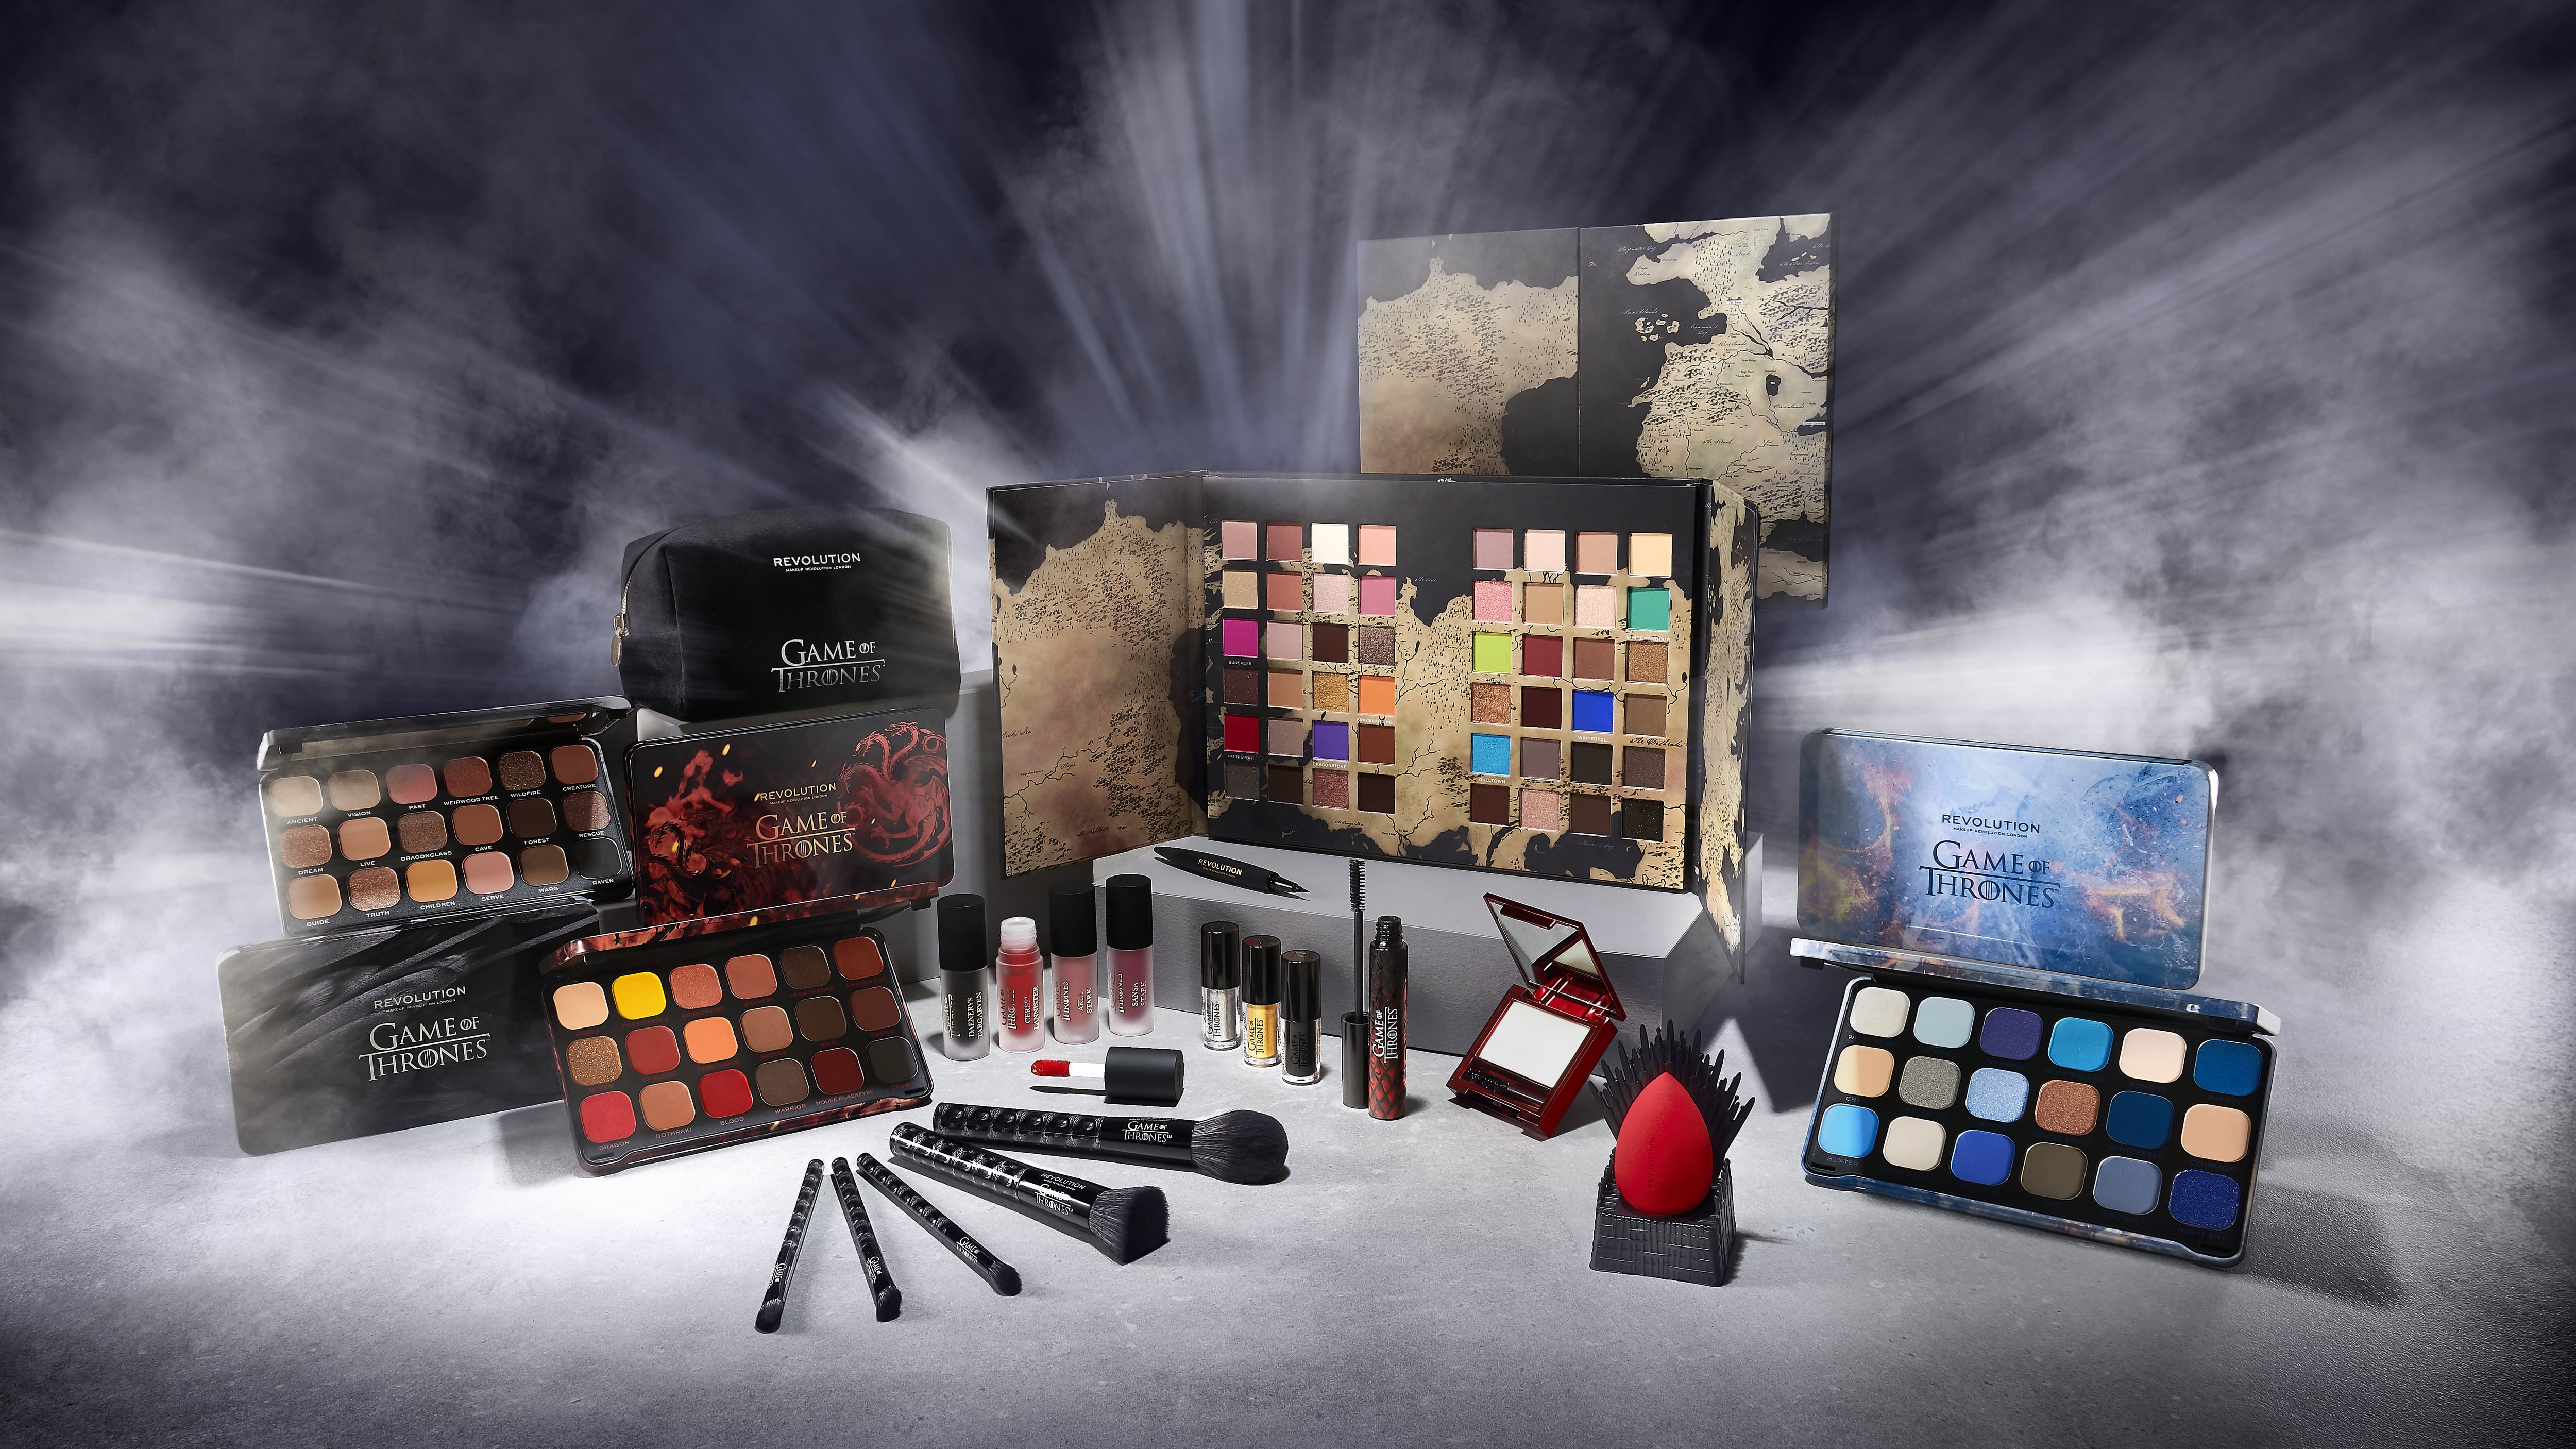 Introducing Game of Thrones makeup for Fall and a House of the Dragon-themed Halloween